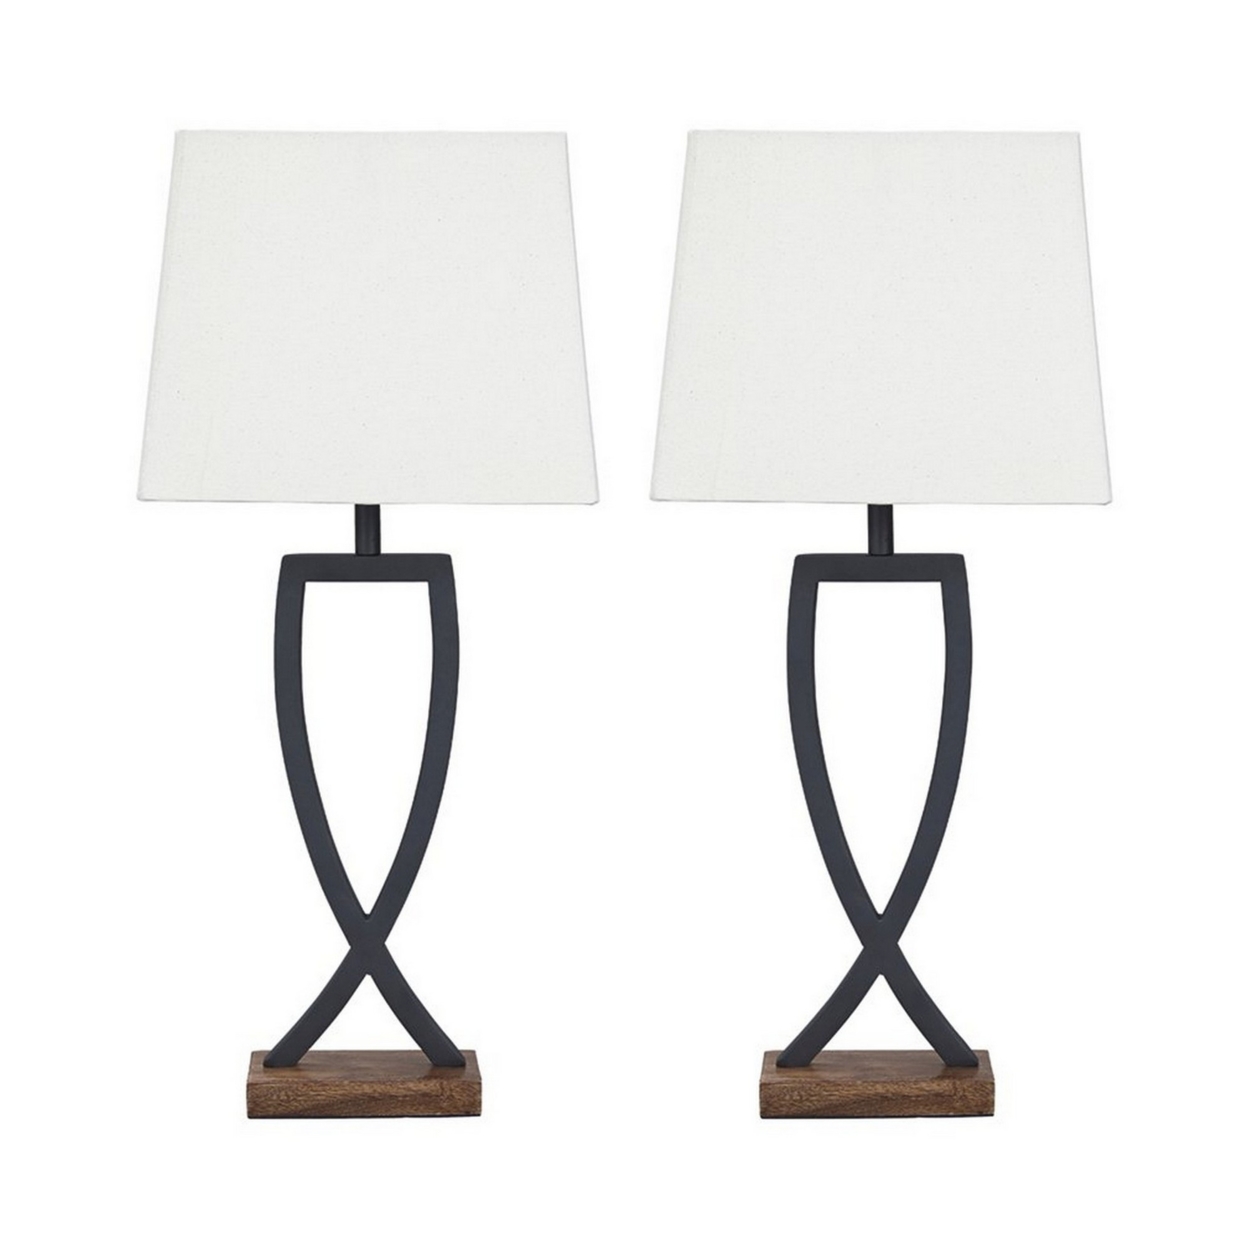 Criss Cross Metal Table Lamp With Fabric Shade, Set Of 2, Gray And White- Saltoro Sherpi